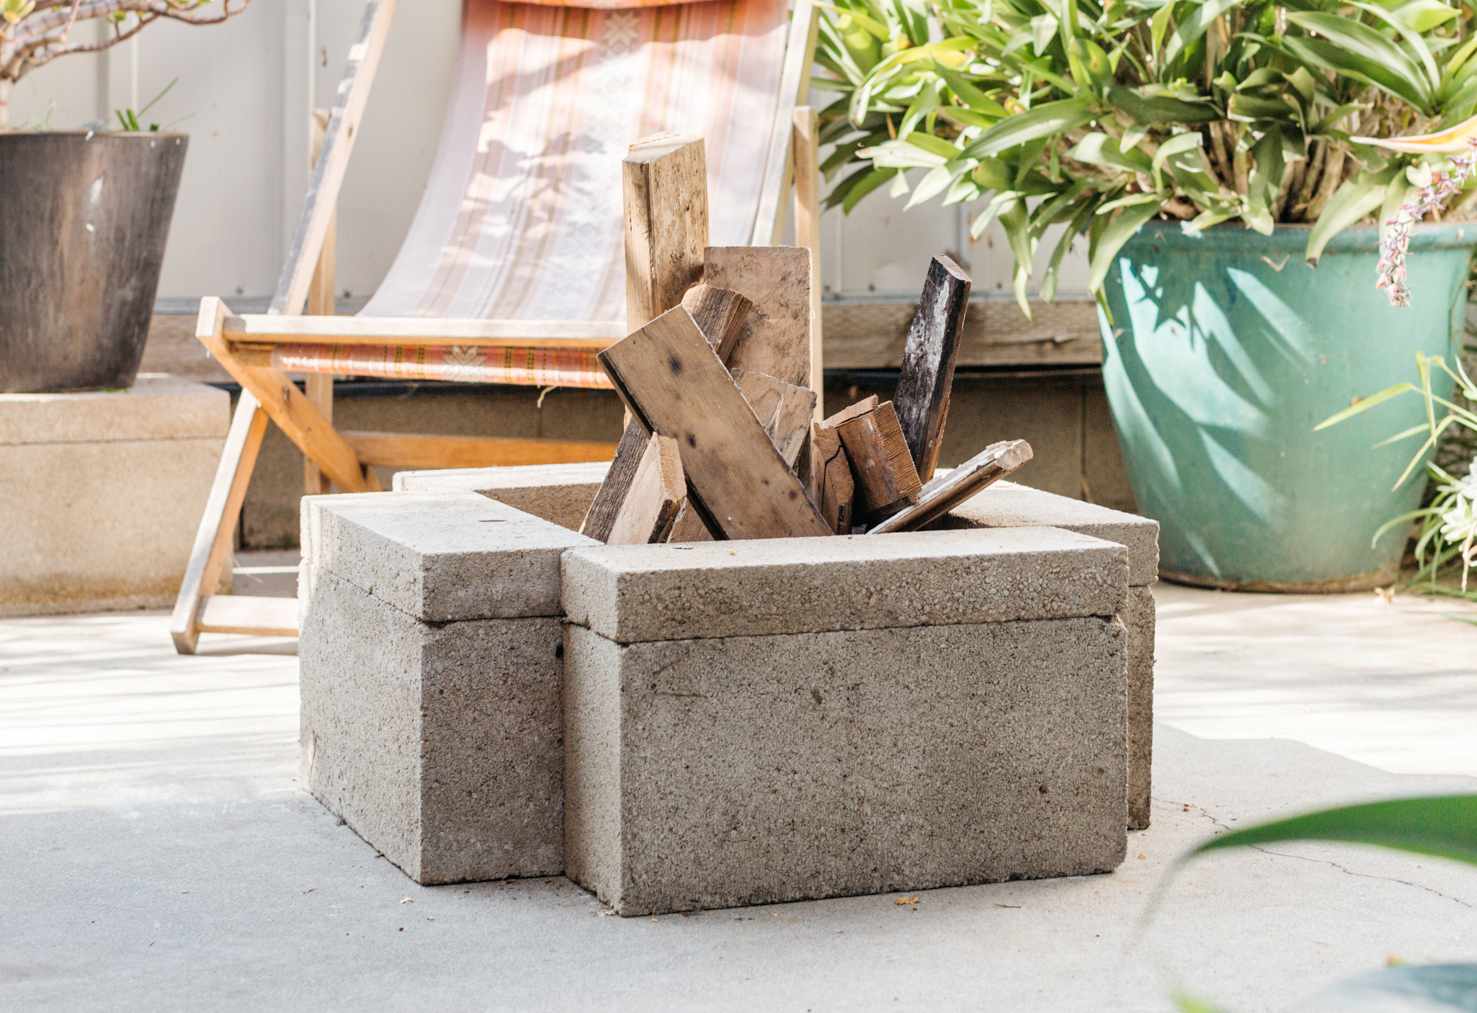 How To Make A Small Outdoor Fire Pit